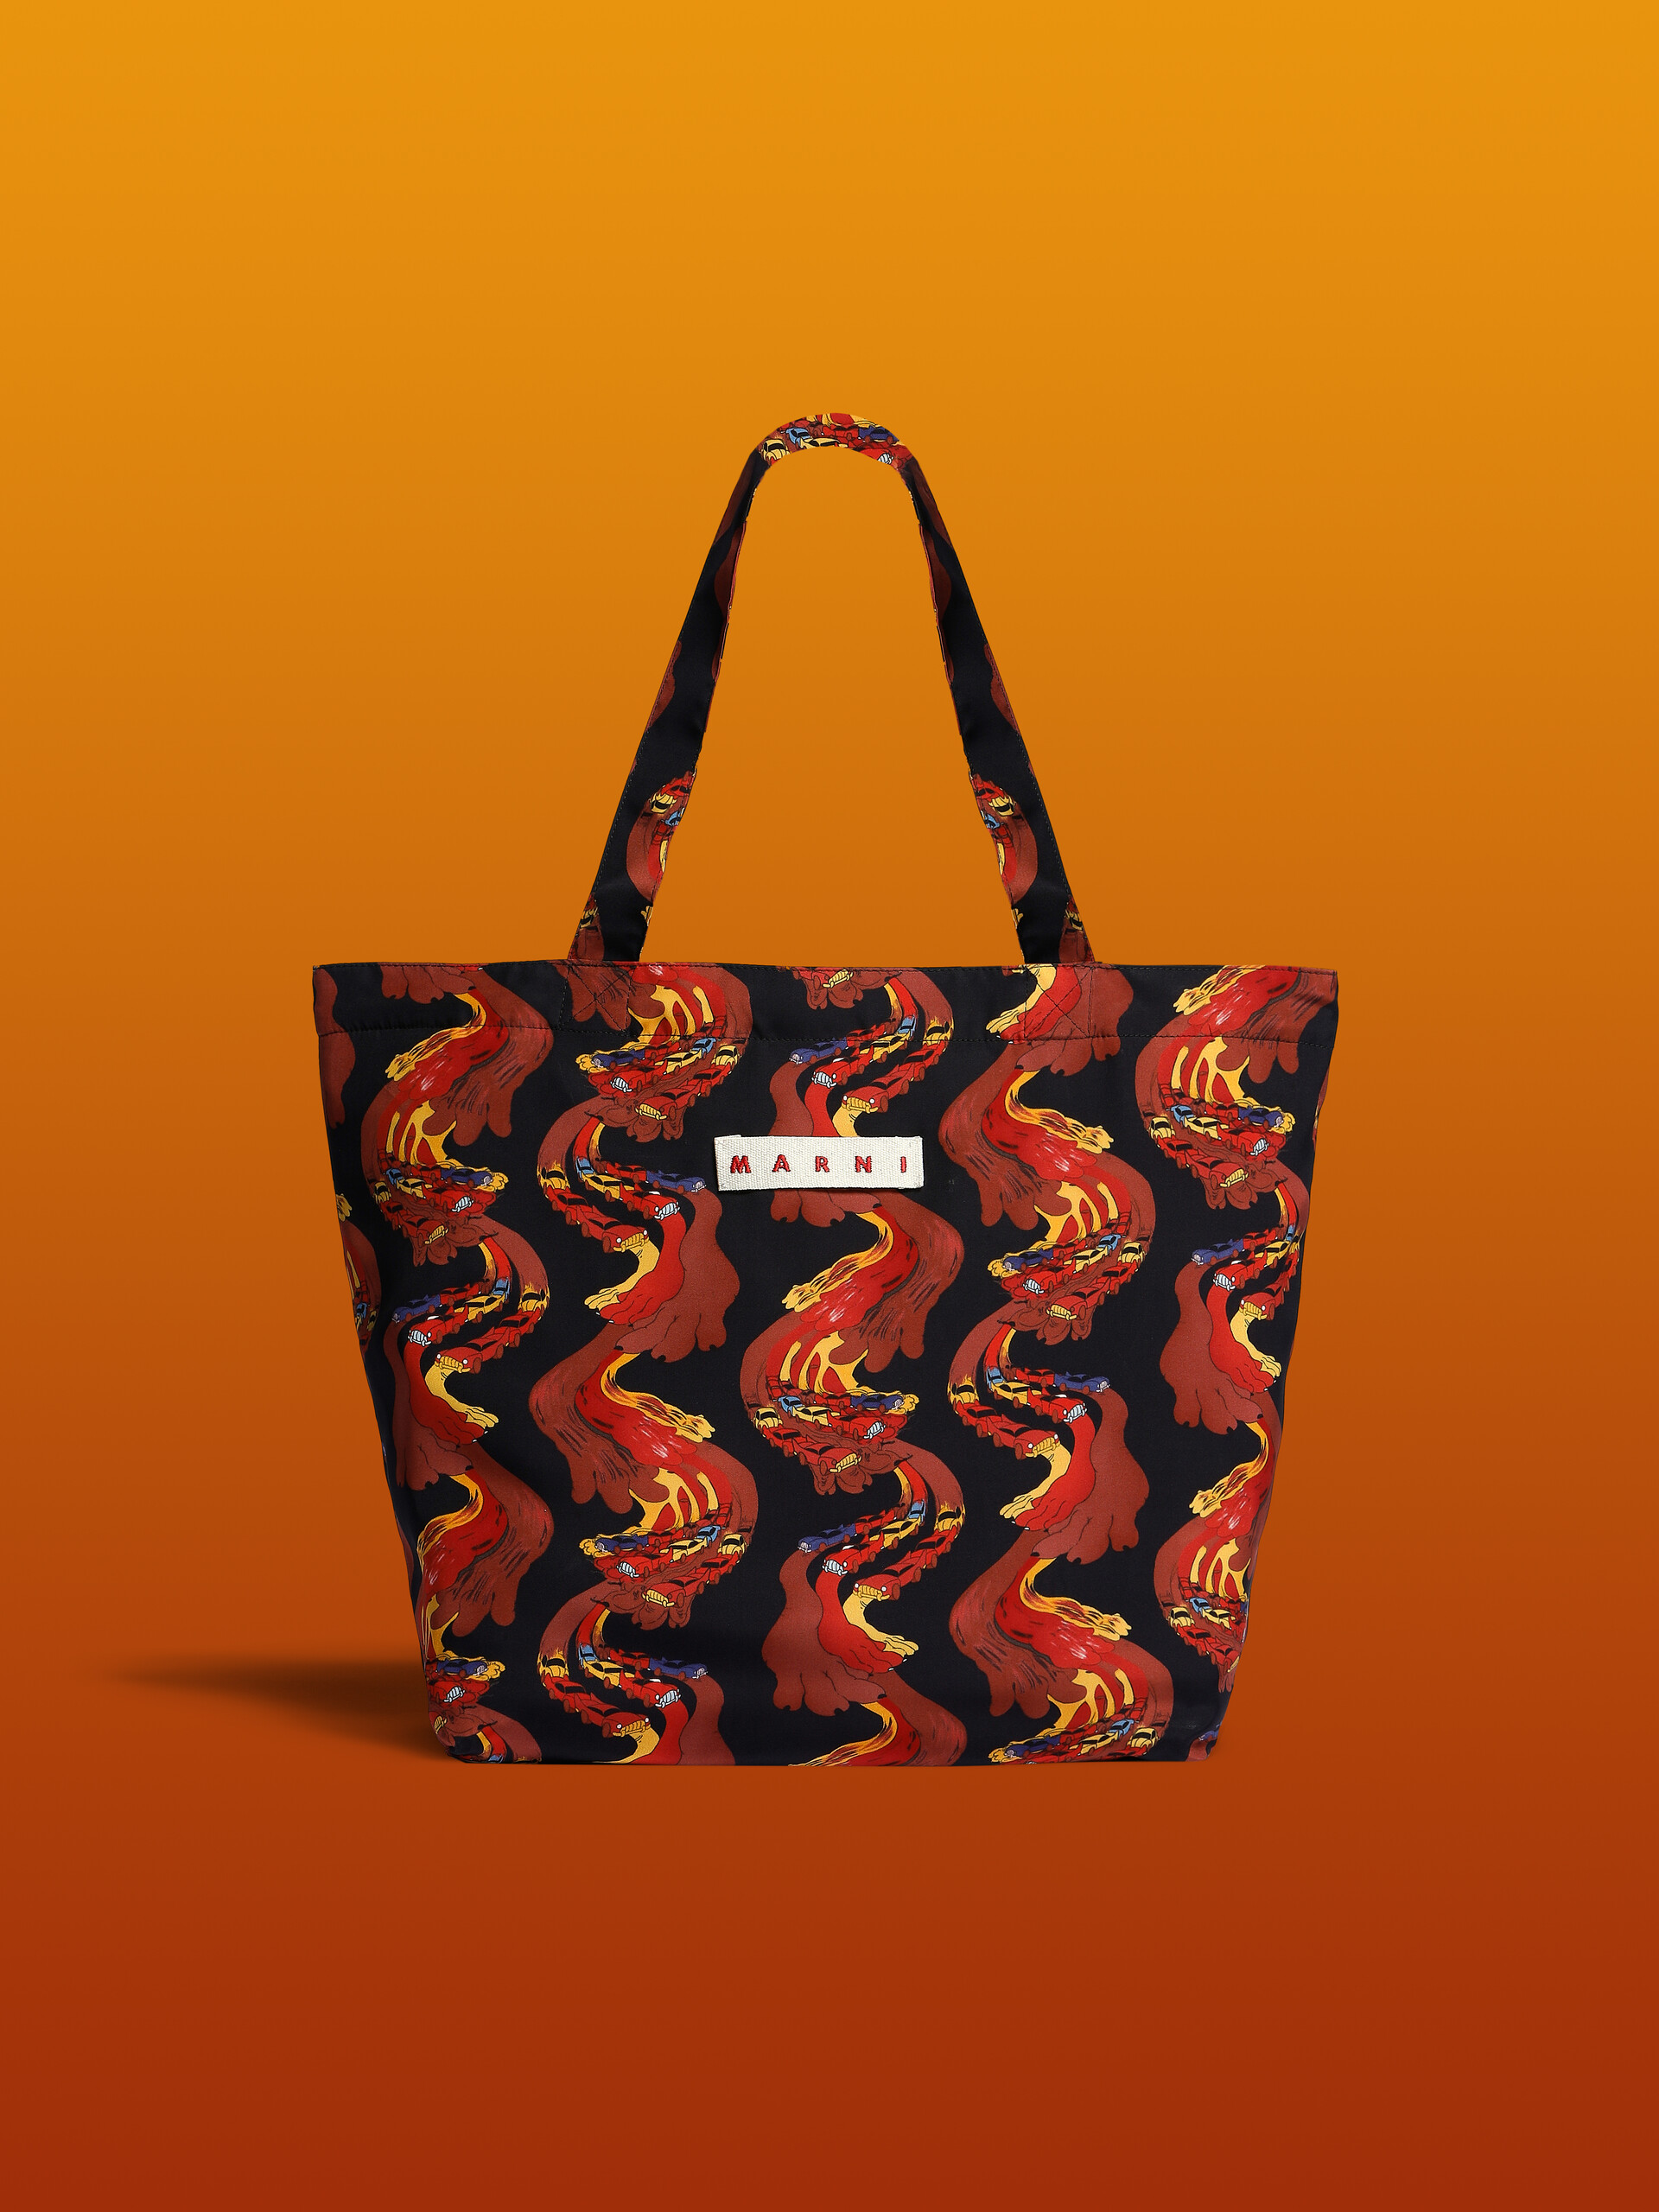 Black viscose tote bag with archival multicoloured print - Shopping Bags - Image 1